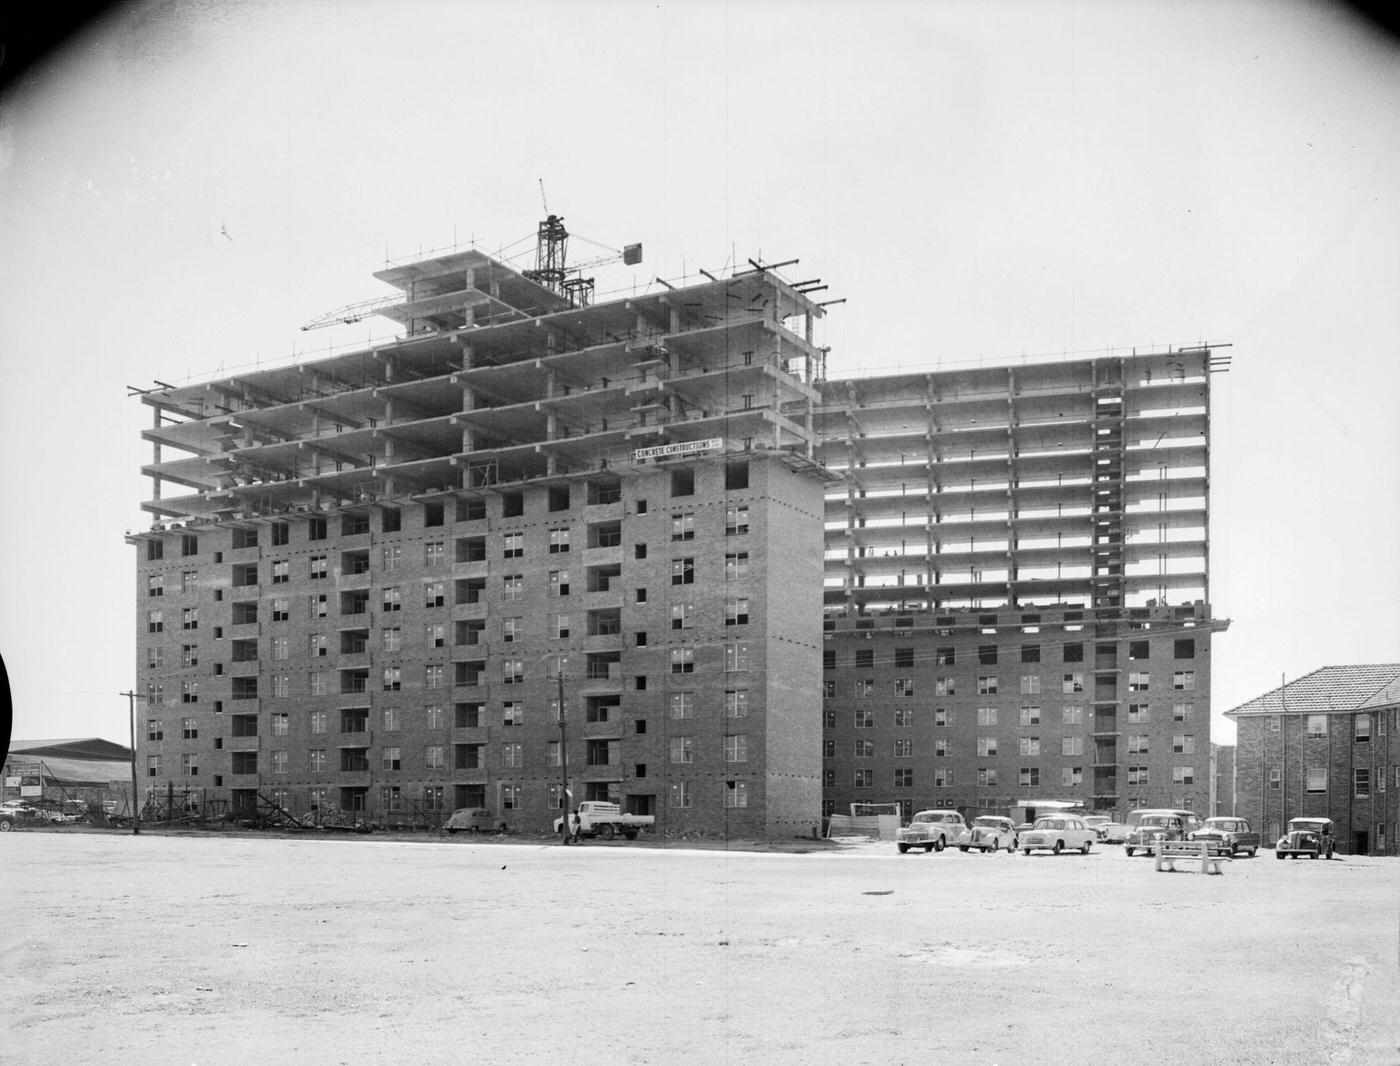 New housing commission flats are under construction in Surry Hills, Sydney, 1960